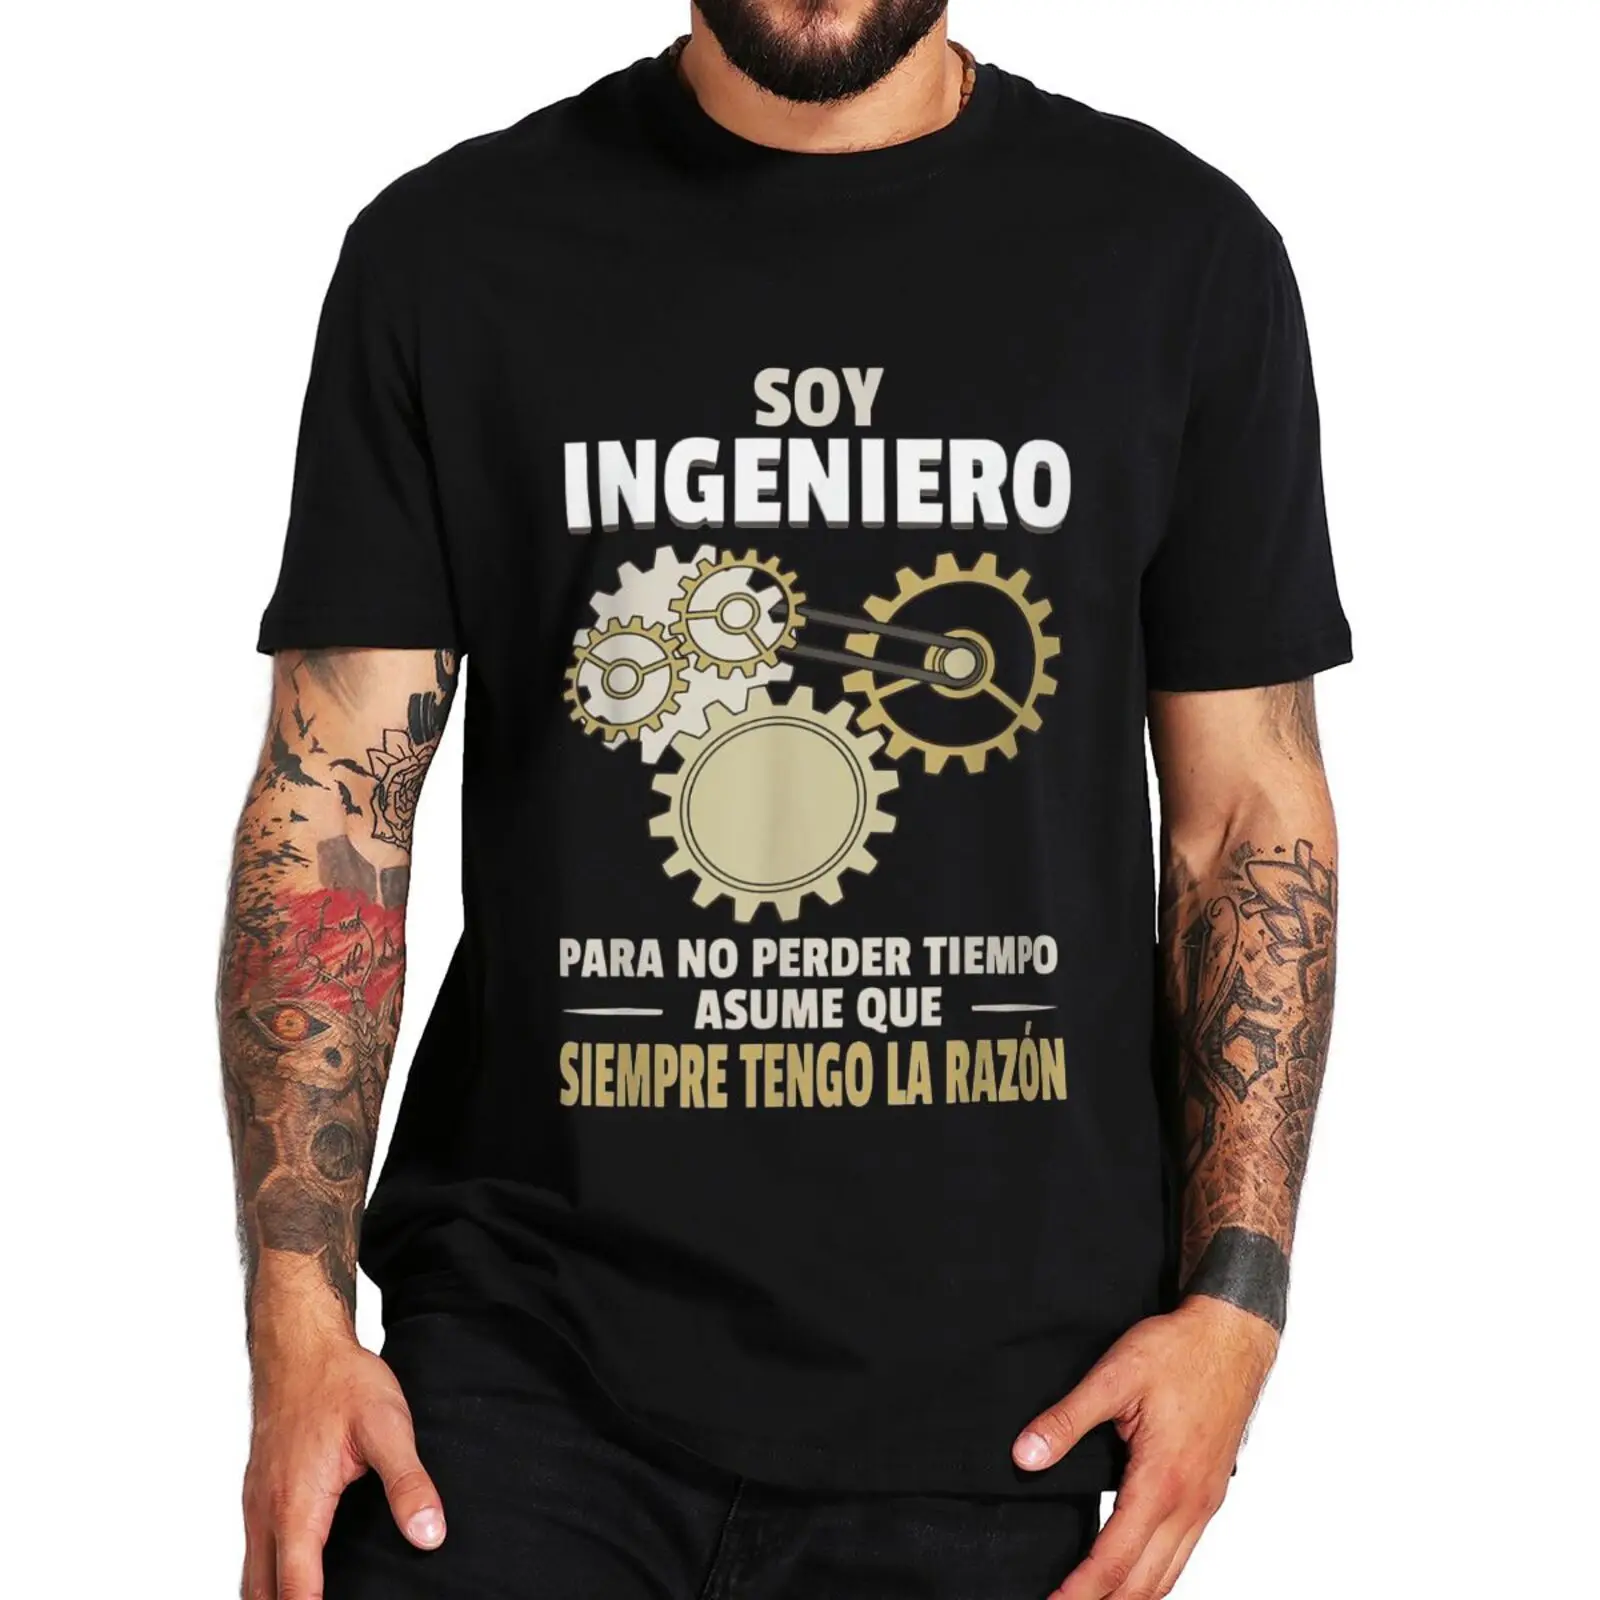 

I'm An Engineer So I'm Always Right T Shirt Funny Spanish Jokes Engineers Gift T-shirts Summer Casual 100% Cotton Unisex Tops